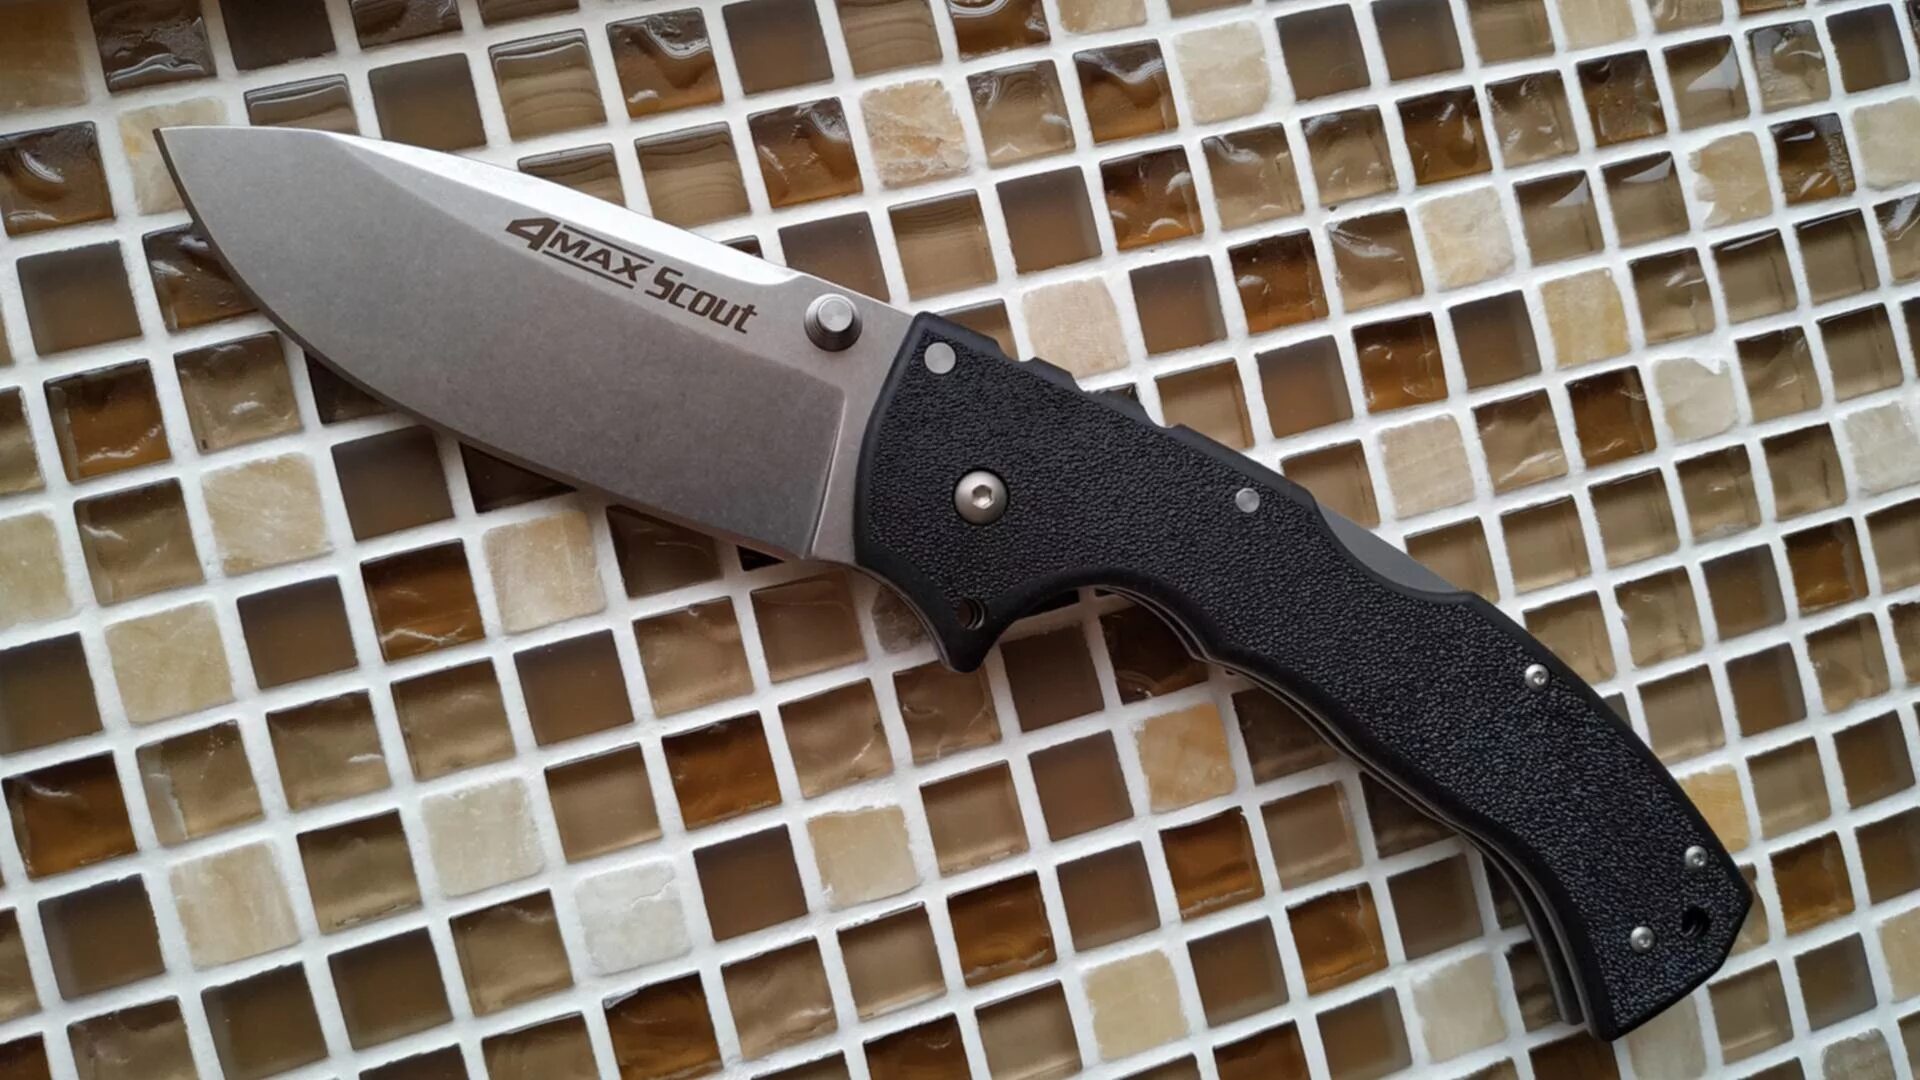 Cold Steel 4max s35vn. 4max Scout. Колд стил 4 Макс Скаут. Cold Steel Max Scout. Cold steel 4